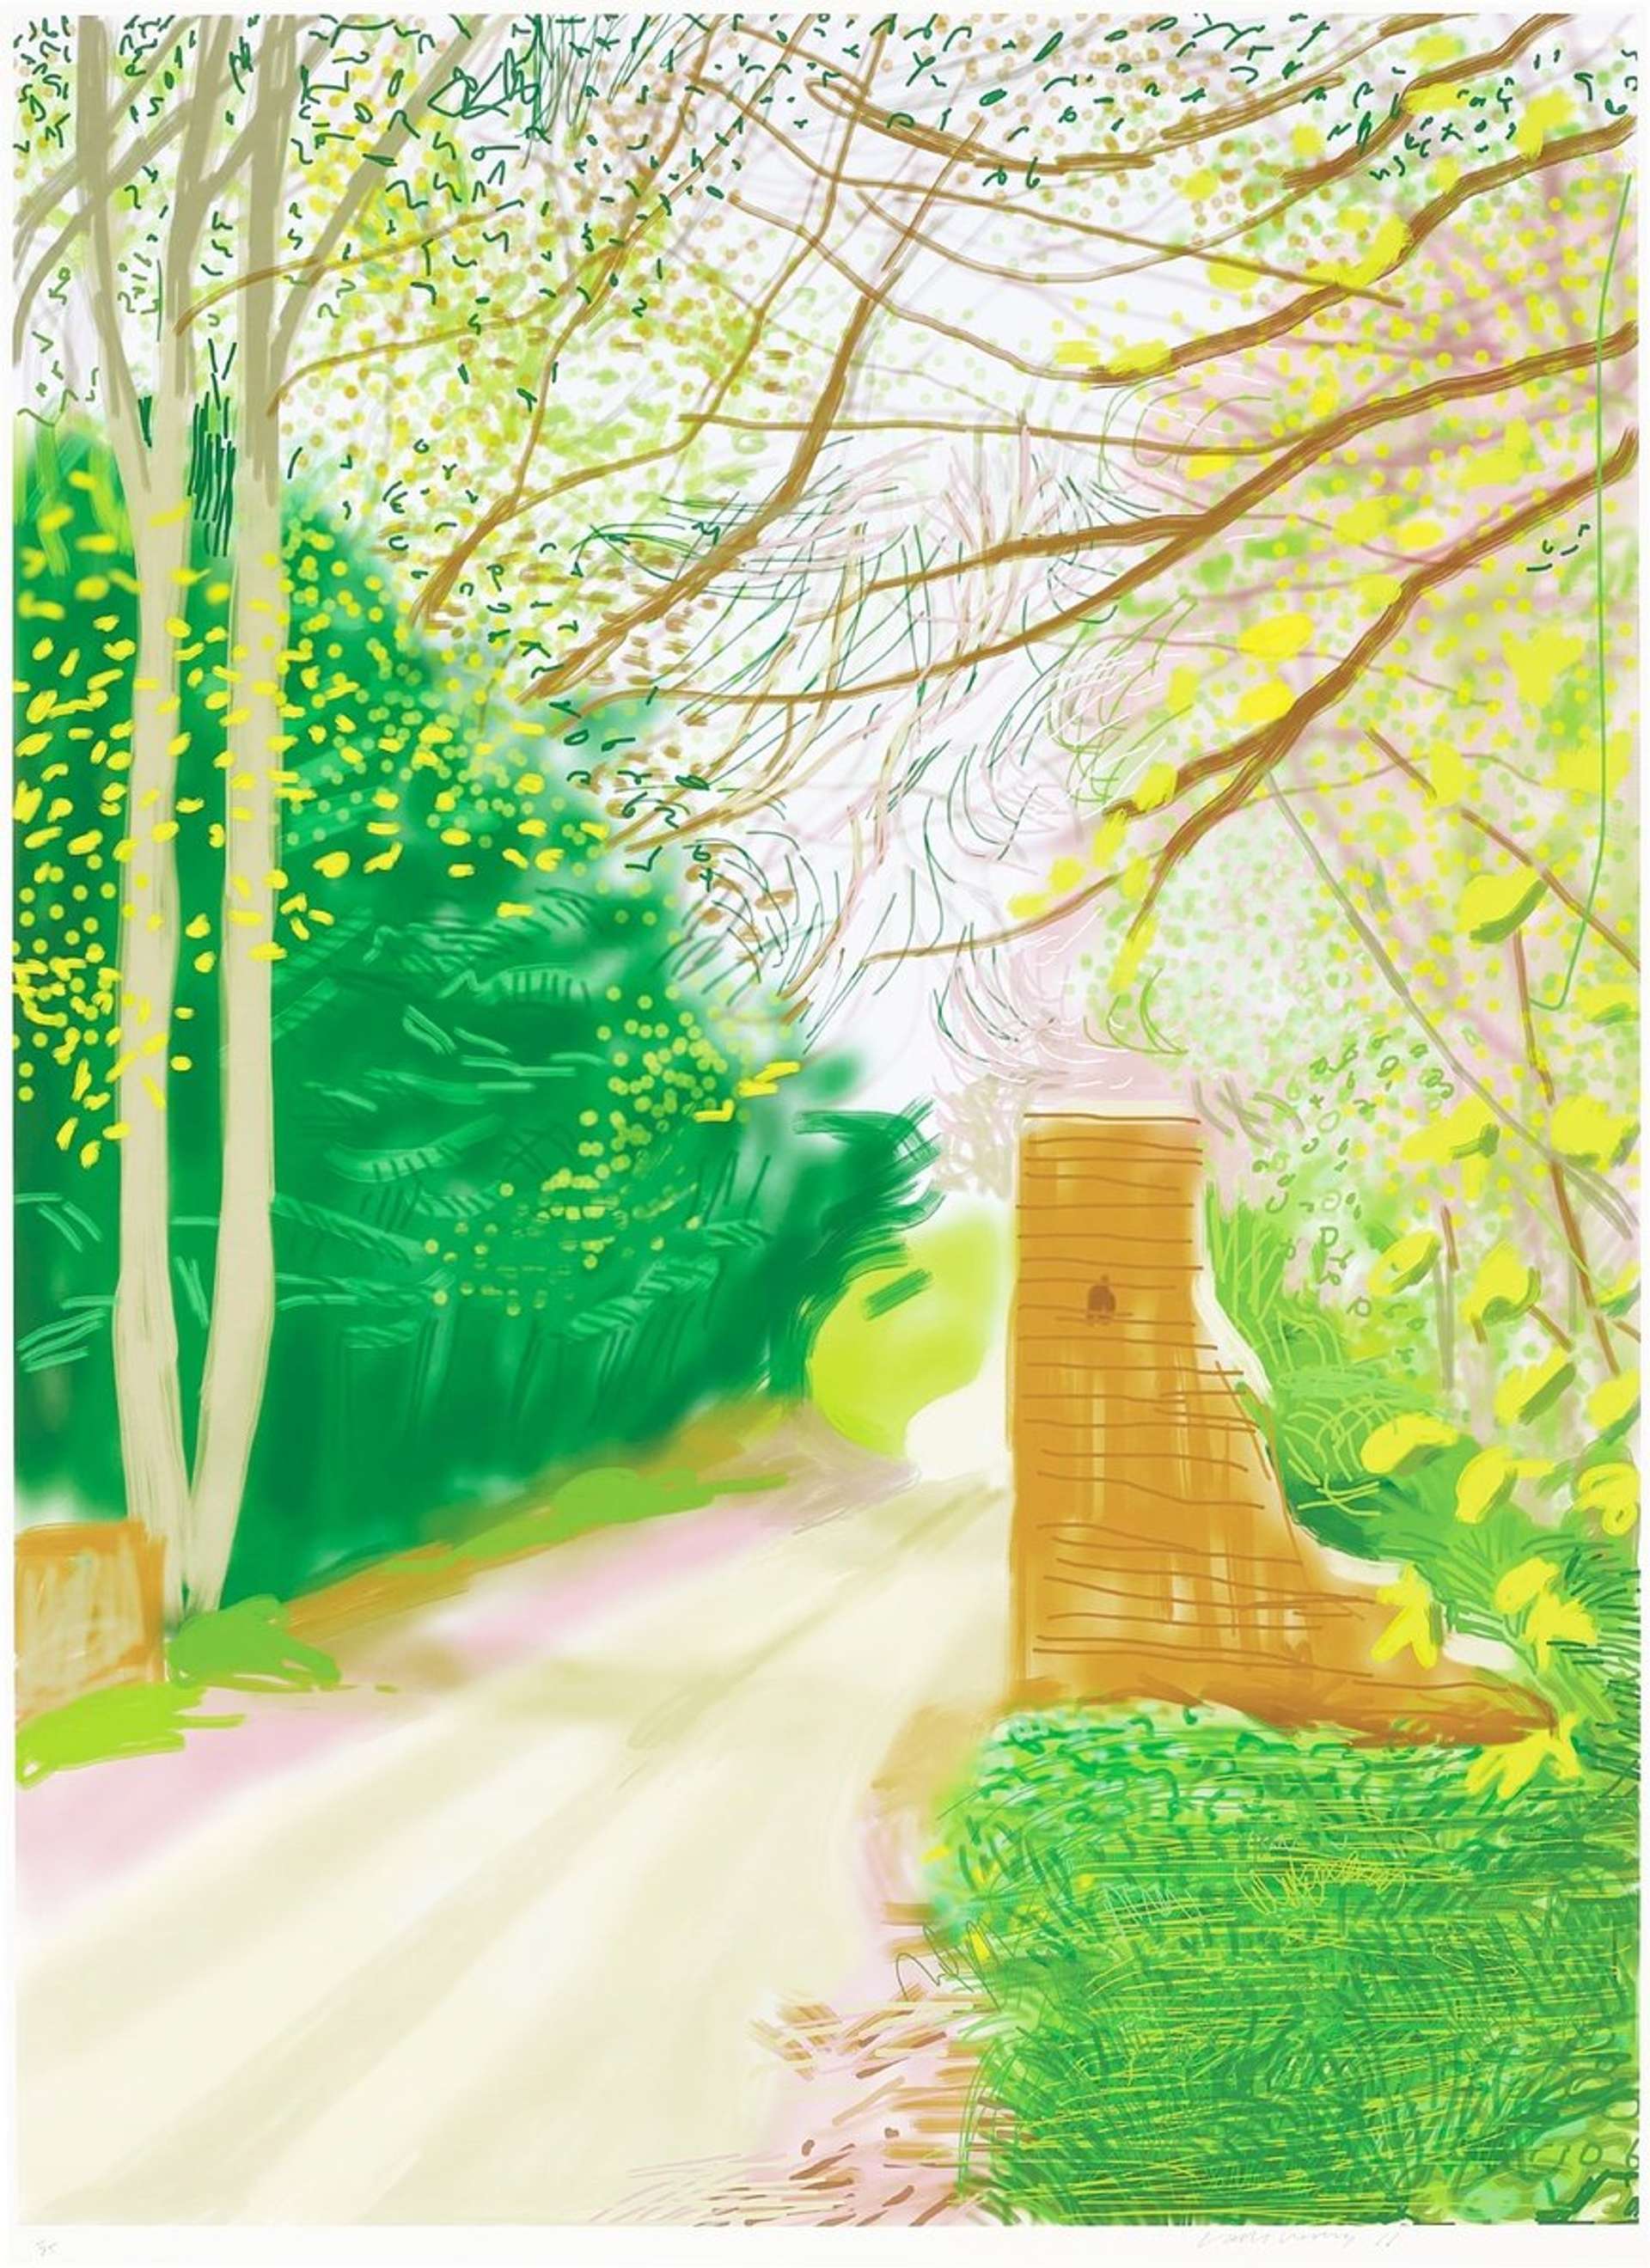 The Arrival Of Spring In Woldgate East Yorkshire 17th April 2011 by David Hockney